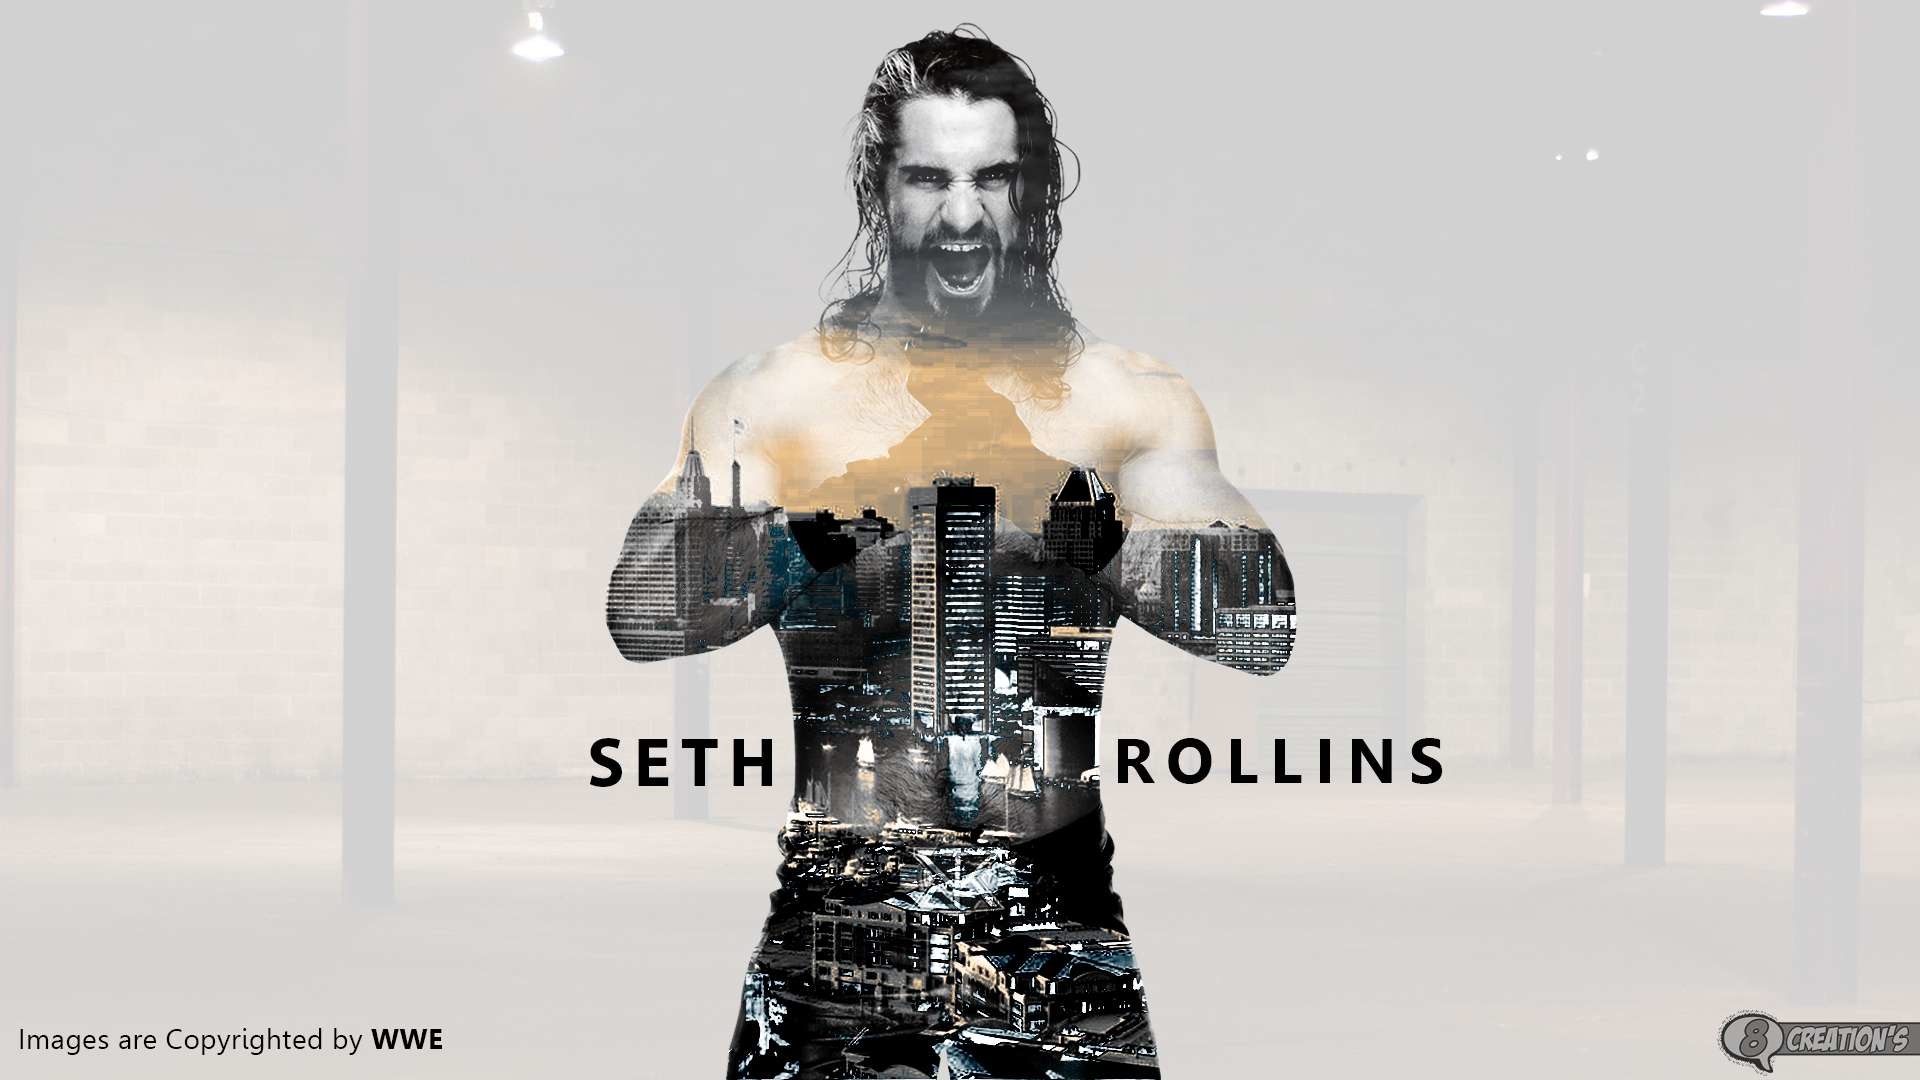 1920x1080 Seth Rollins Wallpaper HD Best Collection Of WWE Superstar